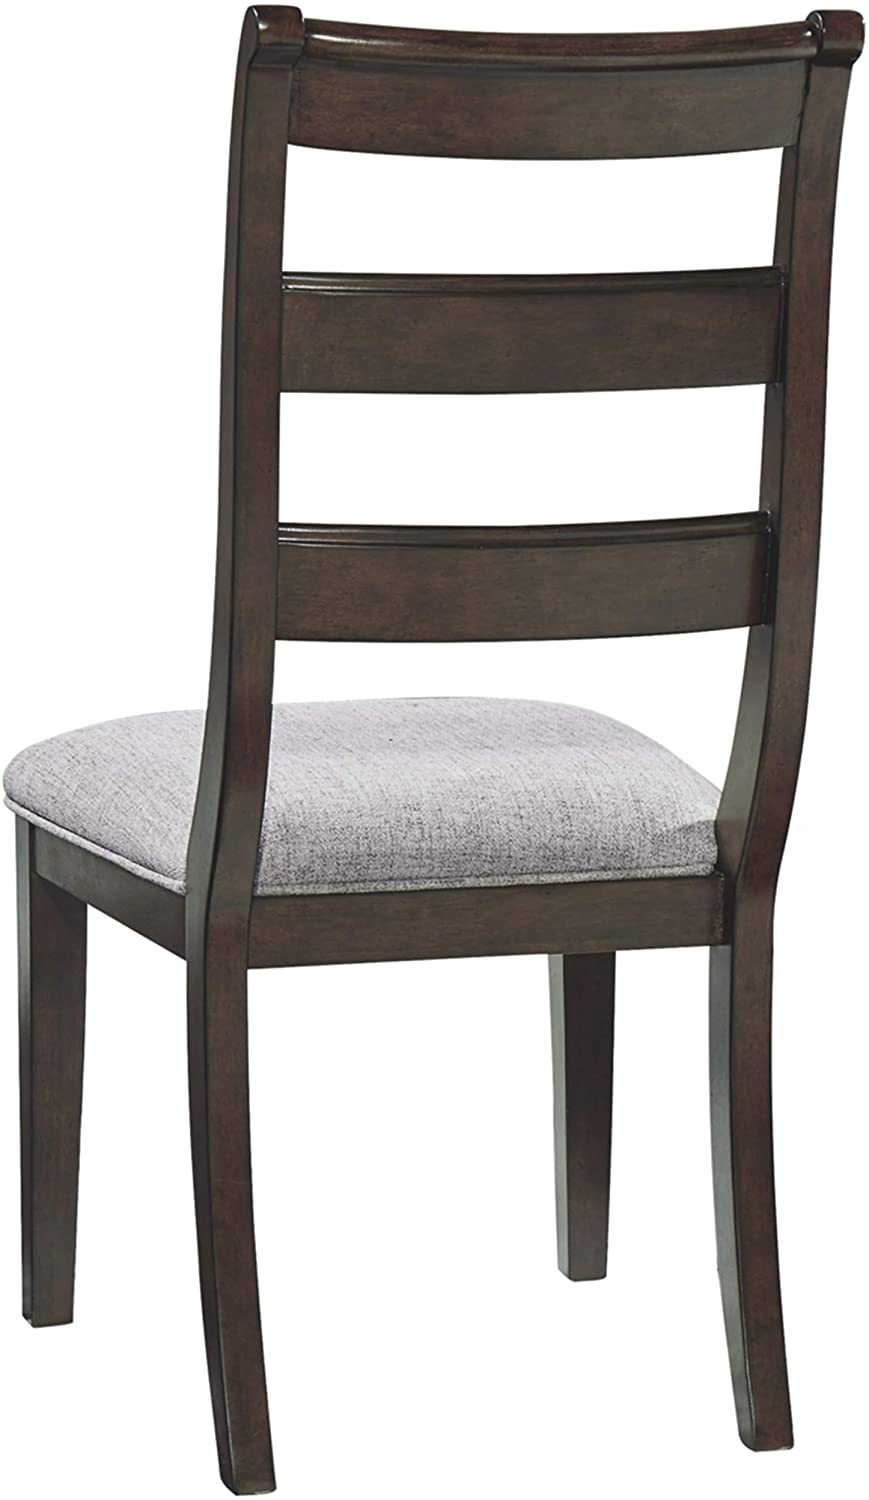 Traditional Cushioned Dining Chair, Set of 2, Warm Brown